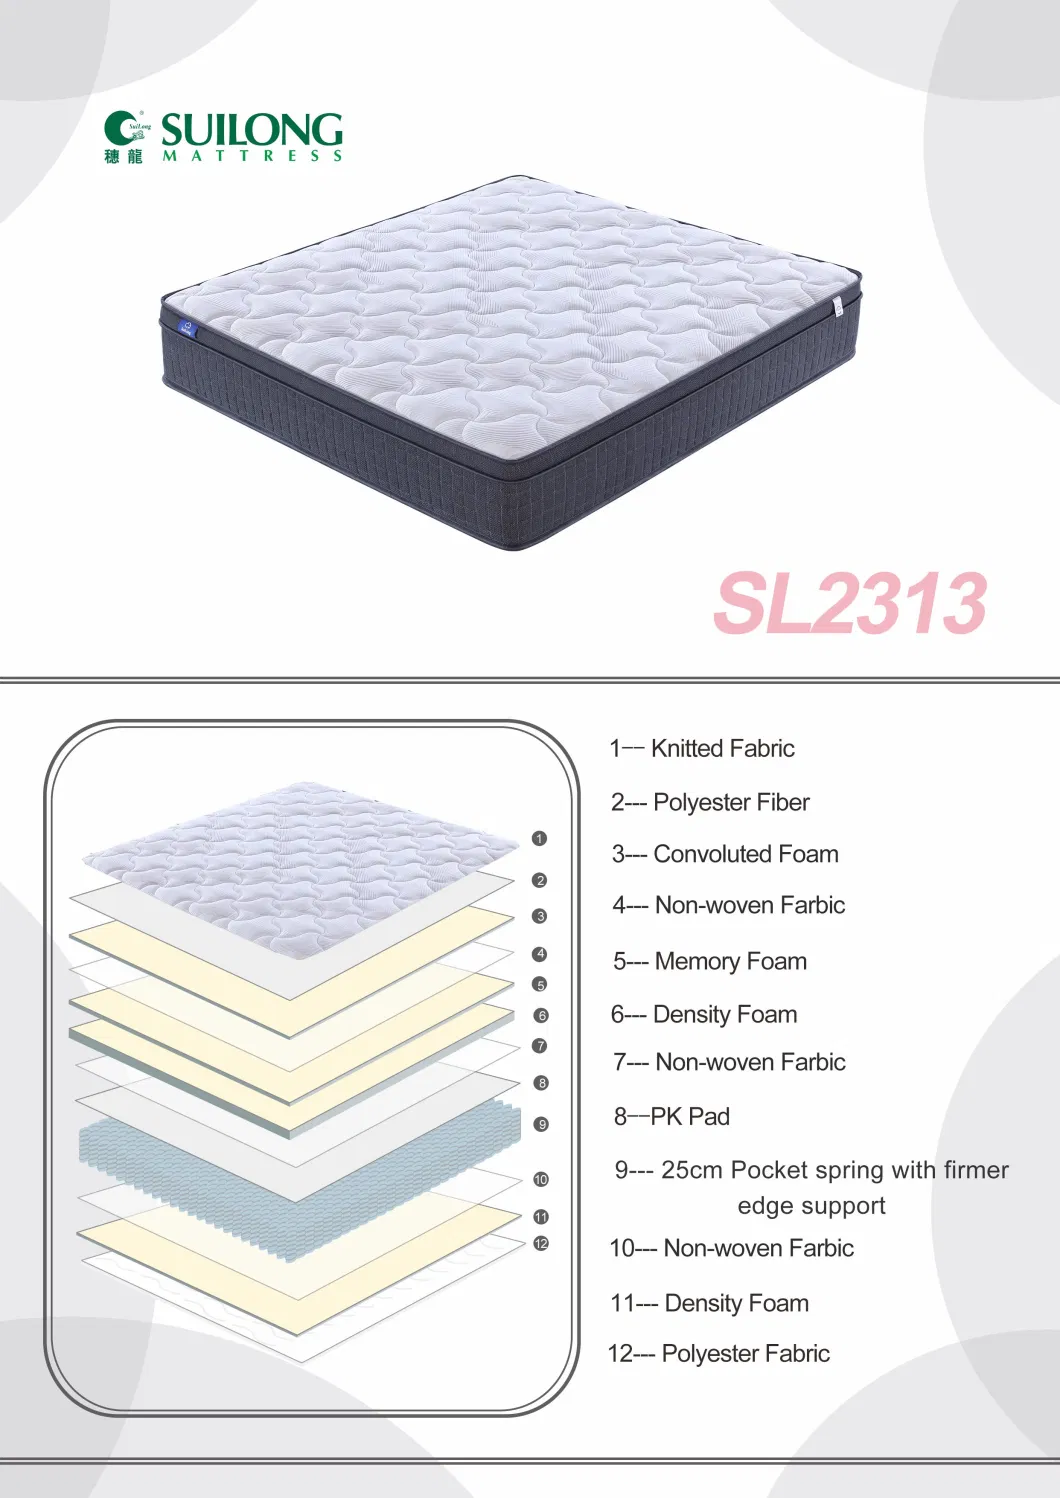 Hot-Selling Independent Pocket Spring Mattress King Size High-Tech Gel Air Memory Foam Mattress in Box Queen Size Double Bed Mattresses Custom OEM